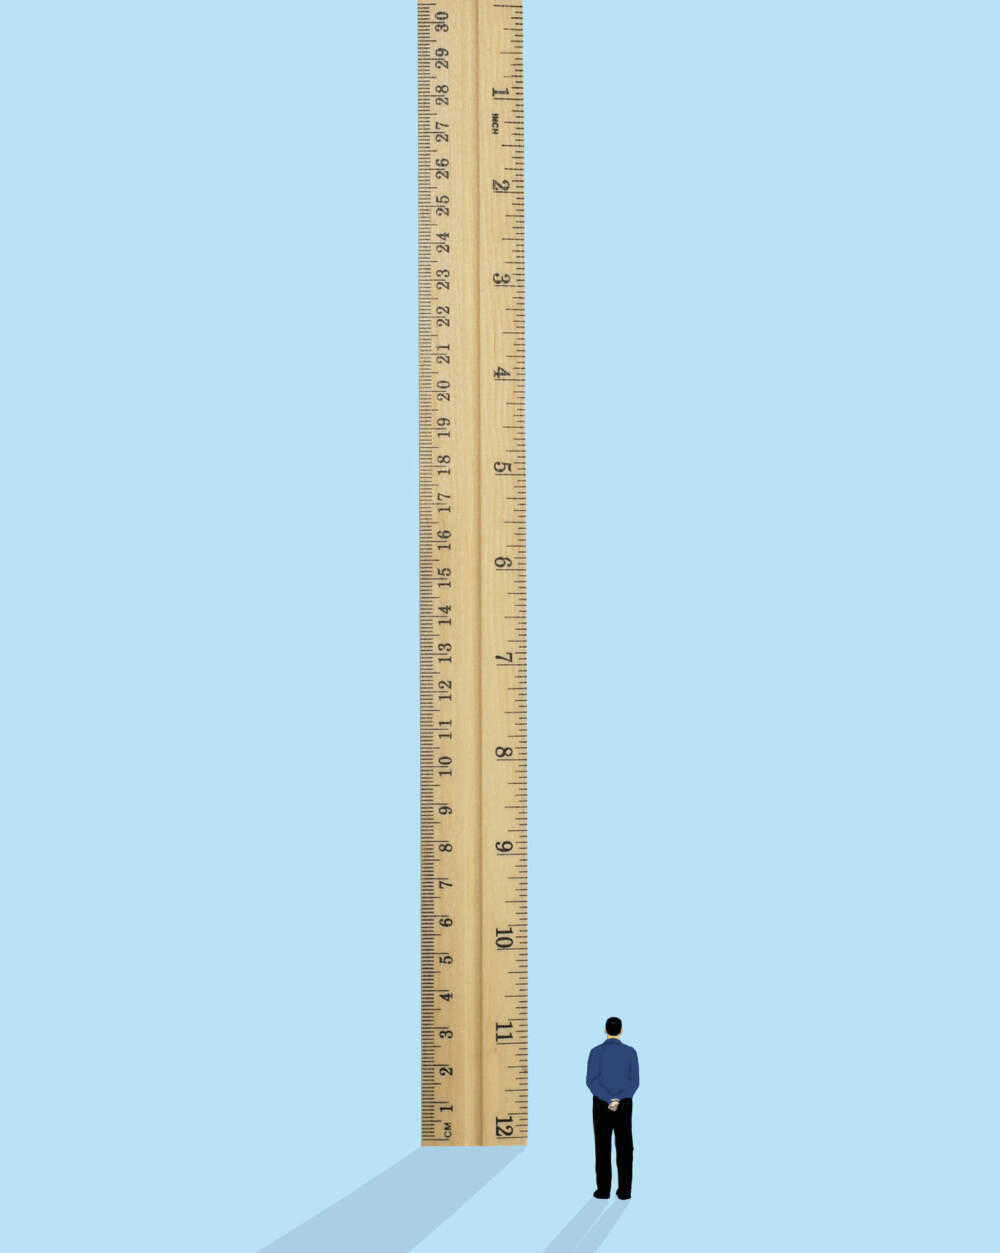 Why a country's average height is a good way of measuring its